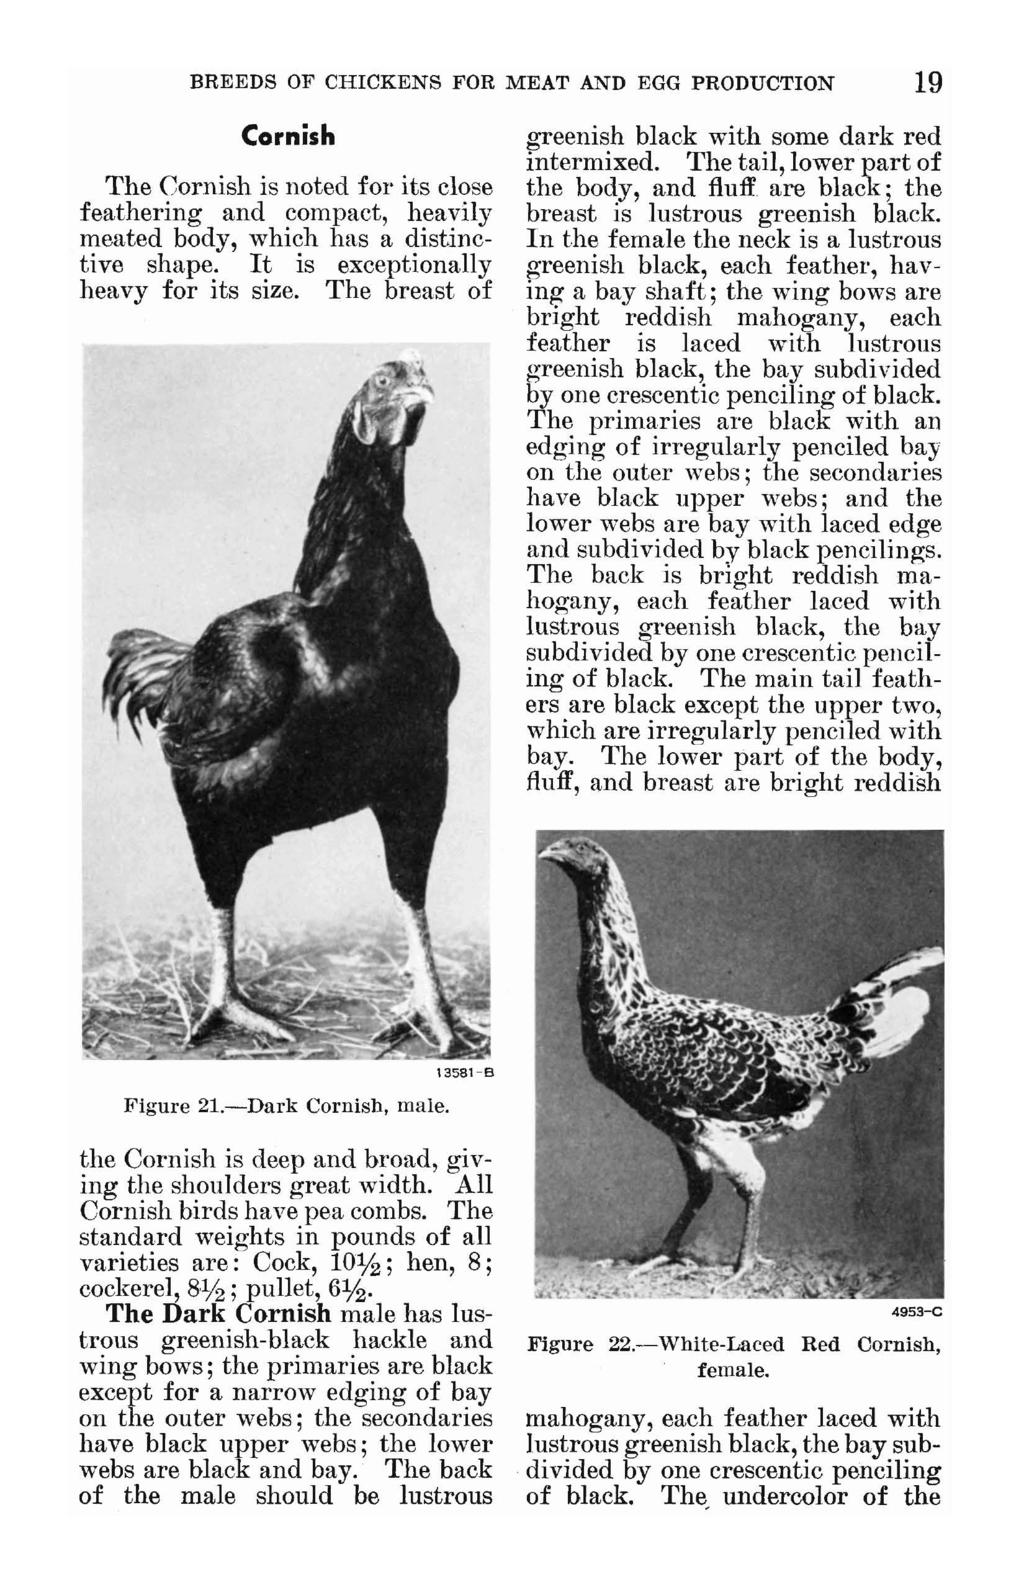 BREEDS OF CHICKENS FOR MEAT AND EGG PRODUCTION 19 Cornish The Cornish is noted for its close feathering and compact, heavily meated body, which has a distinctive shape.